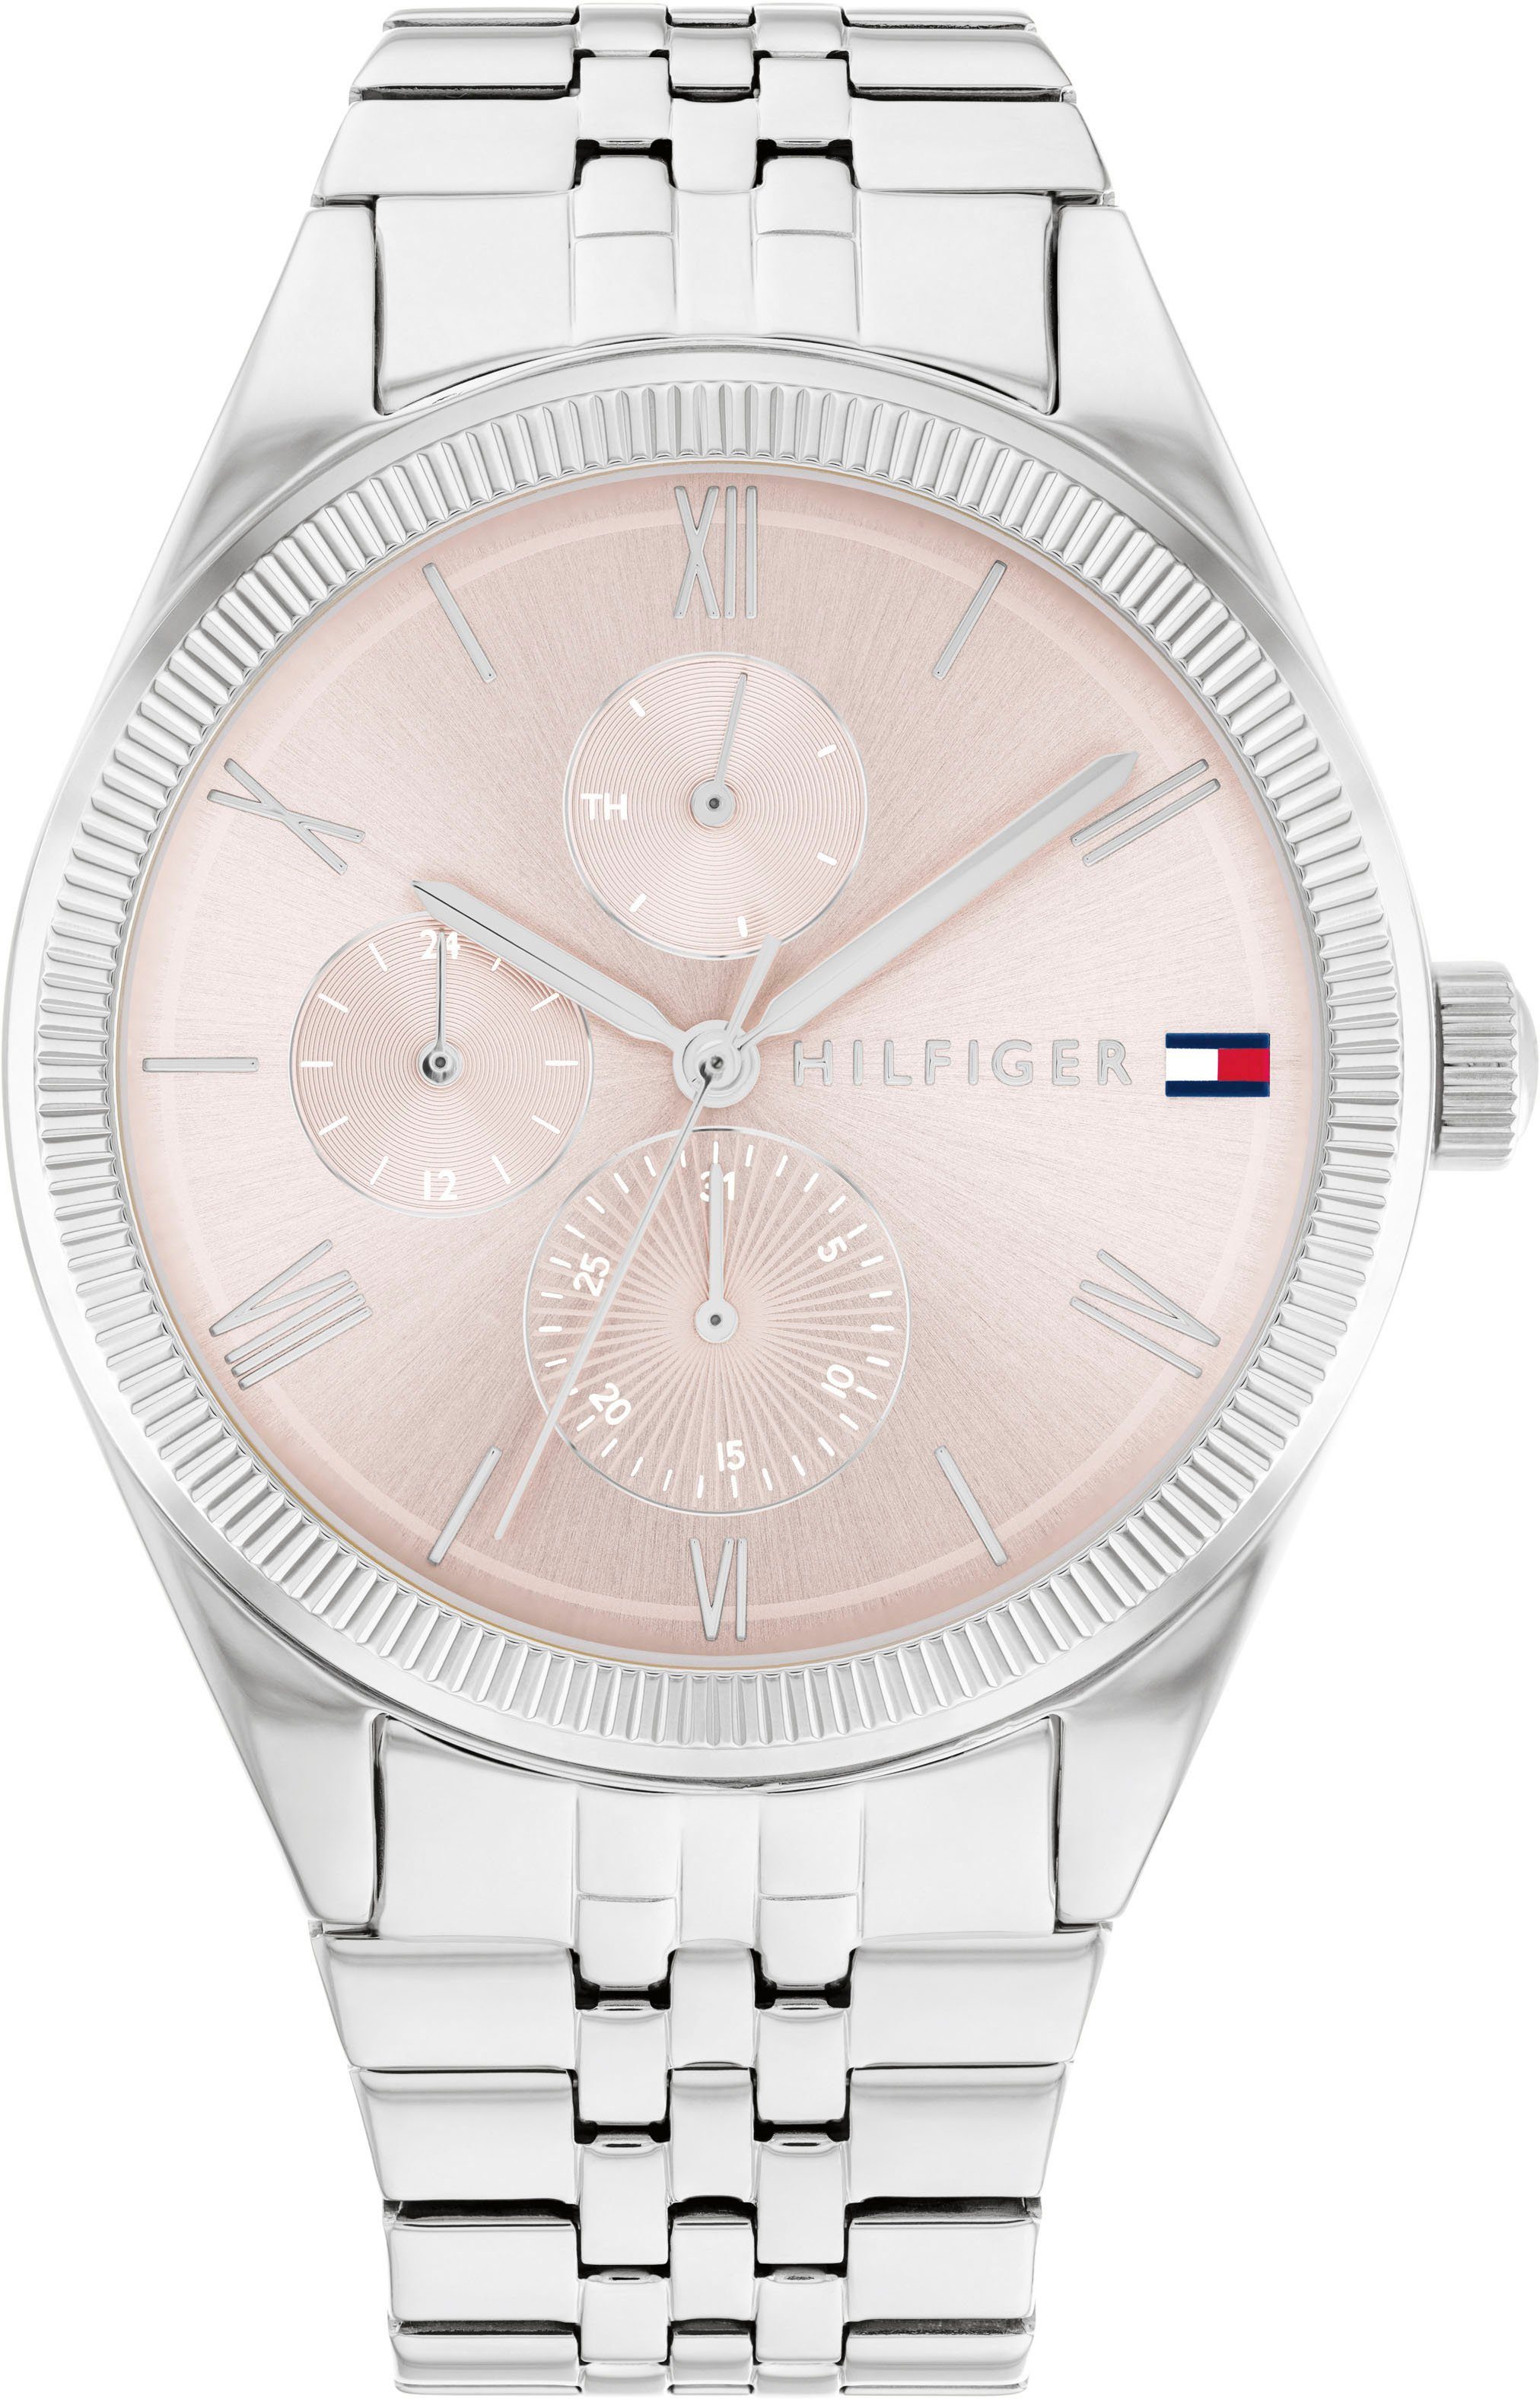 Multifunktionsuhr CLASSIC, Hilfiger Tommy 1782590